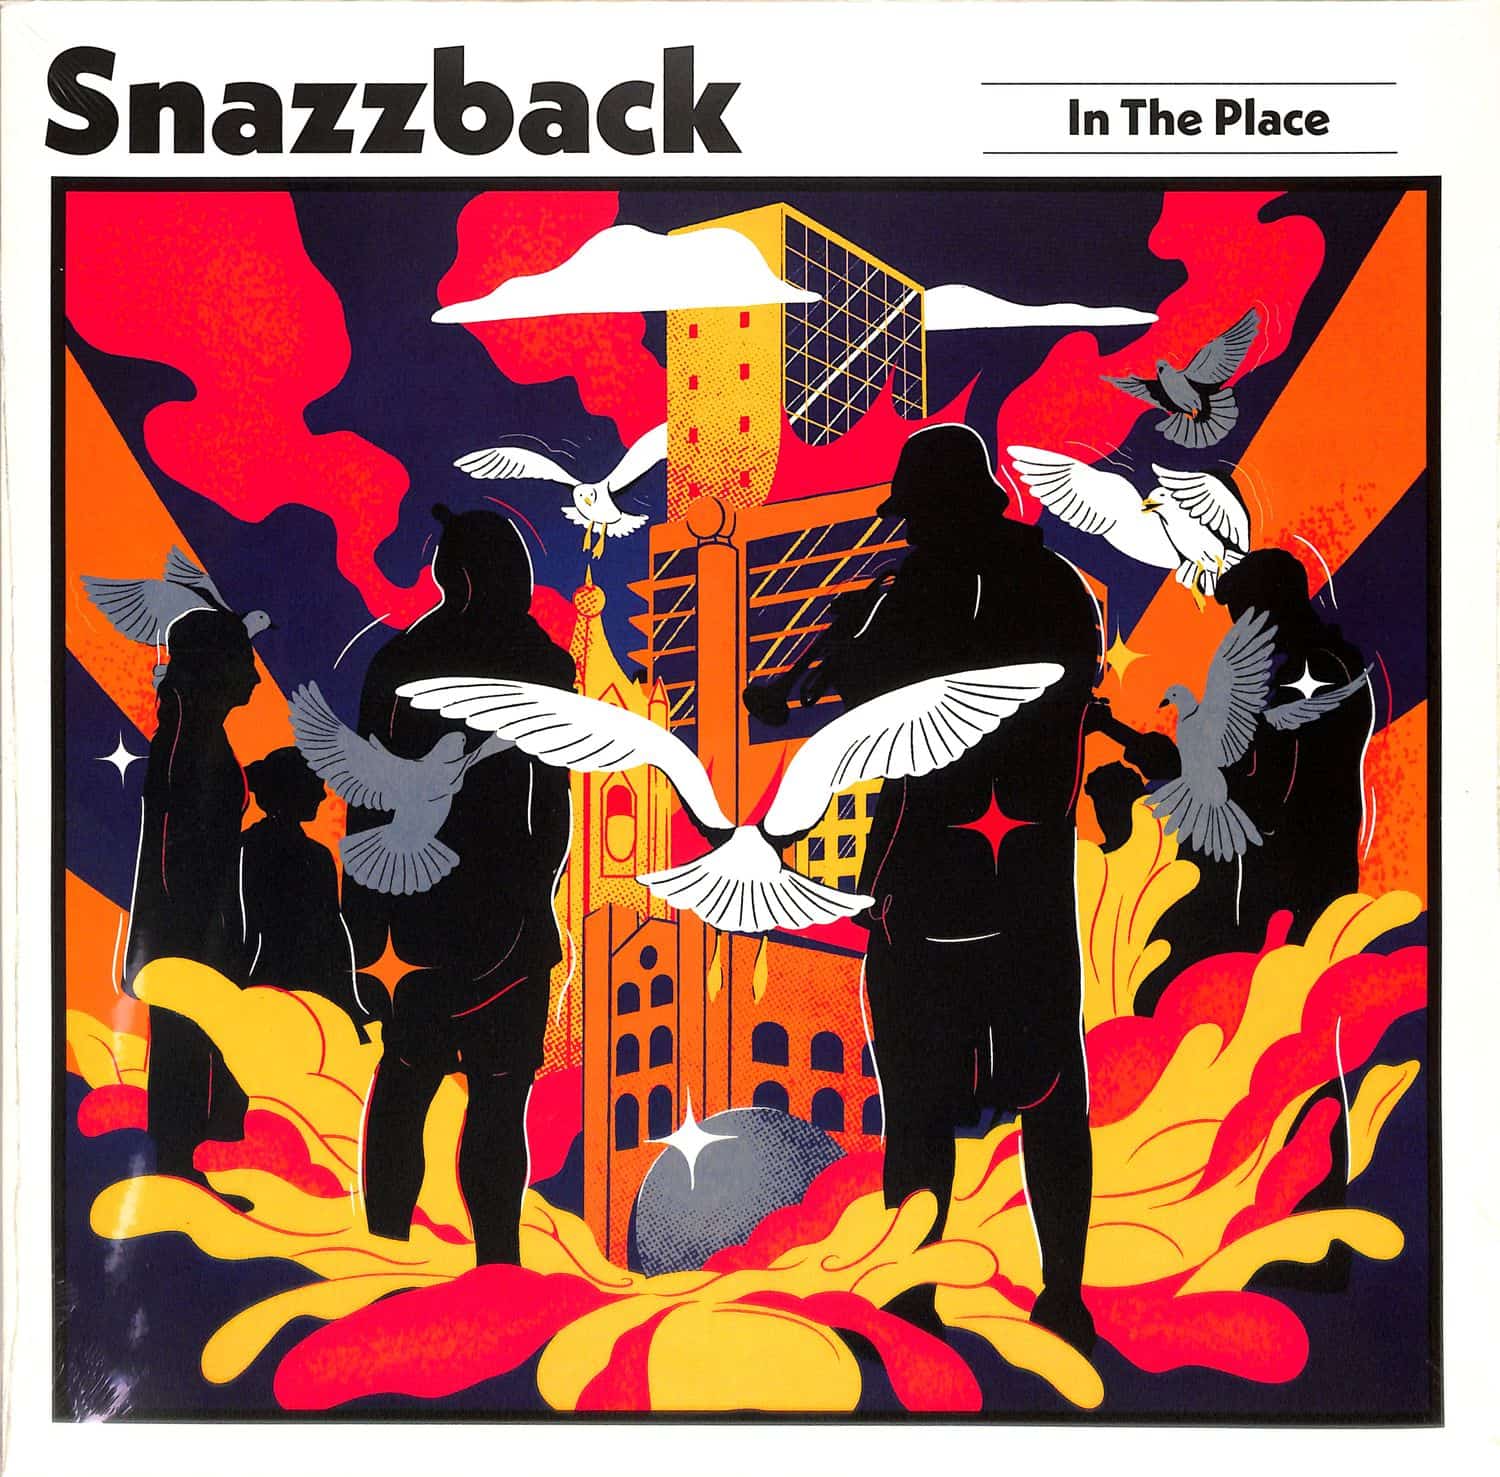 Snazzback - IN THE PLACE 